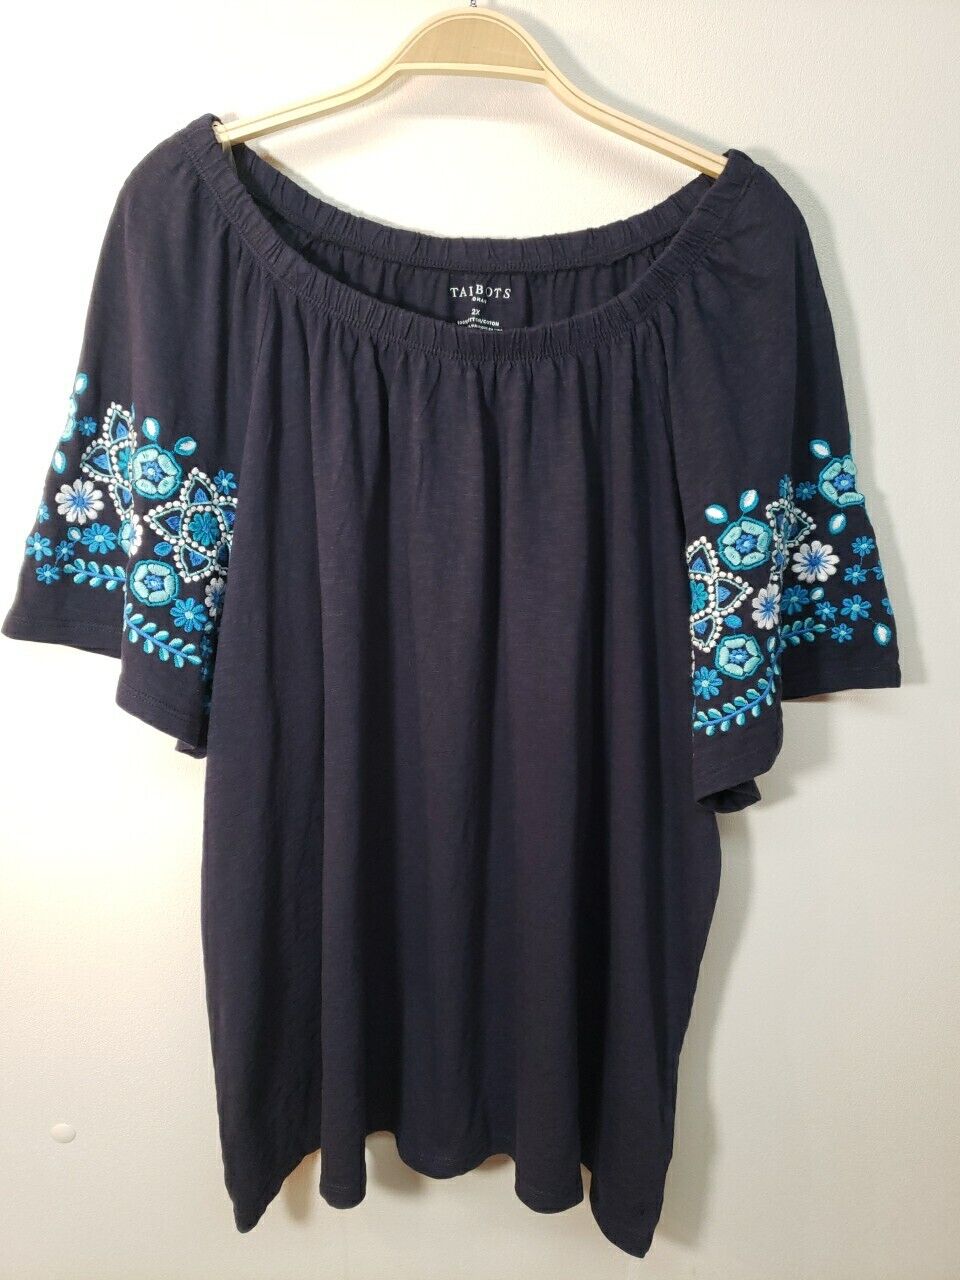 NWOT Talbots Embroidered Gauze Top Size 2X Cotton Elastic Pleated Neckline Navy